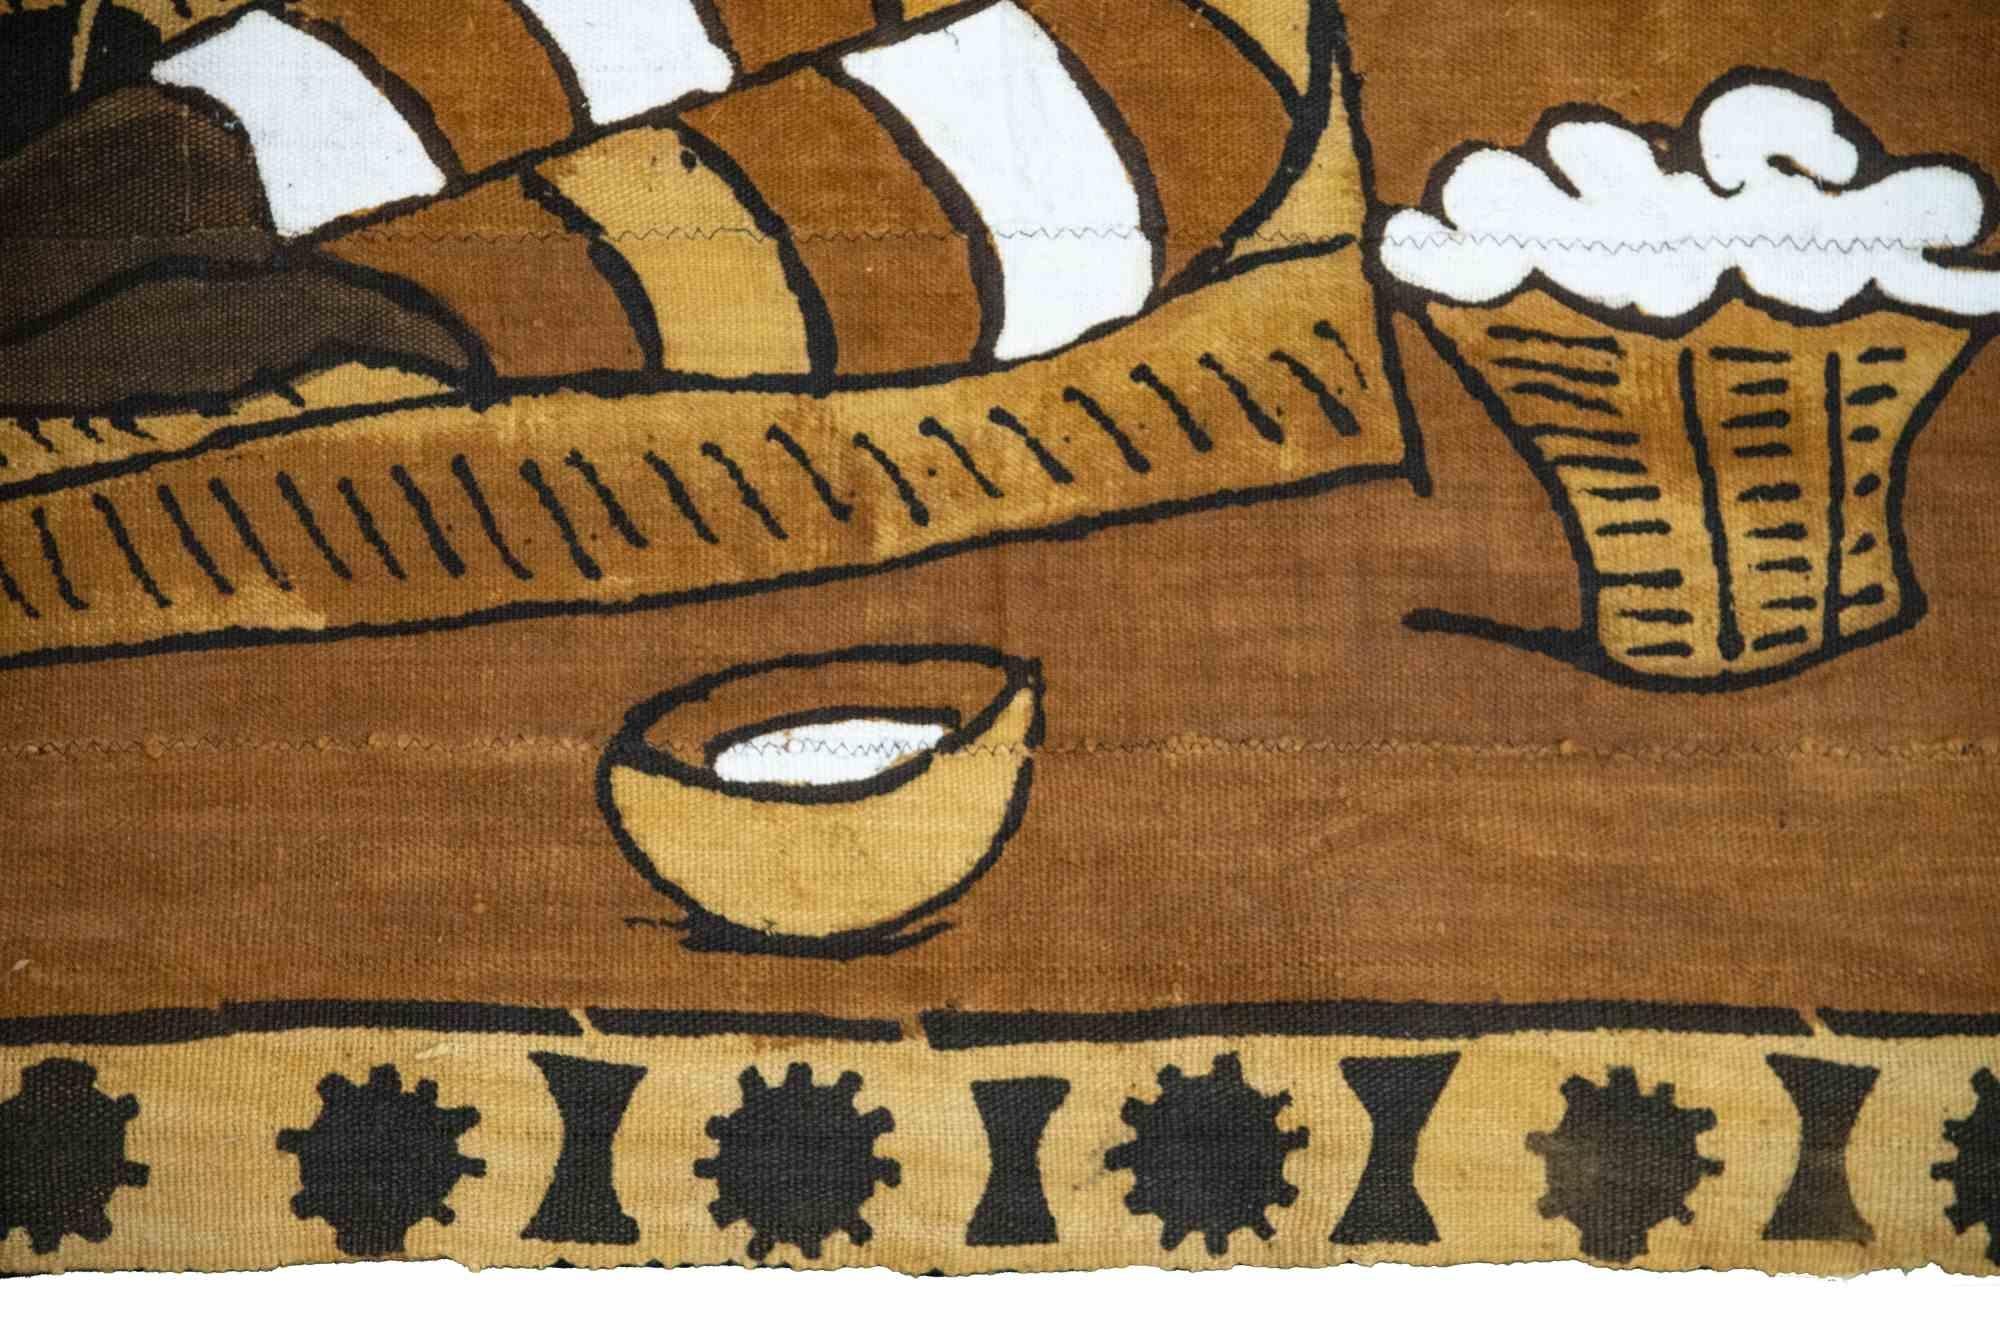 African Tapestry - Composition in Cotton Blanket - Mid-20th Cent. - Art by Unknown